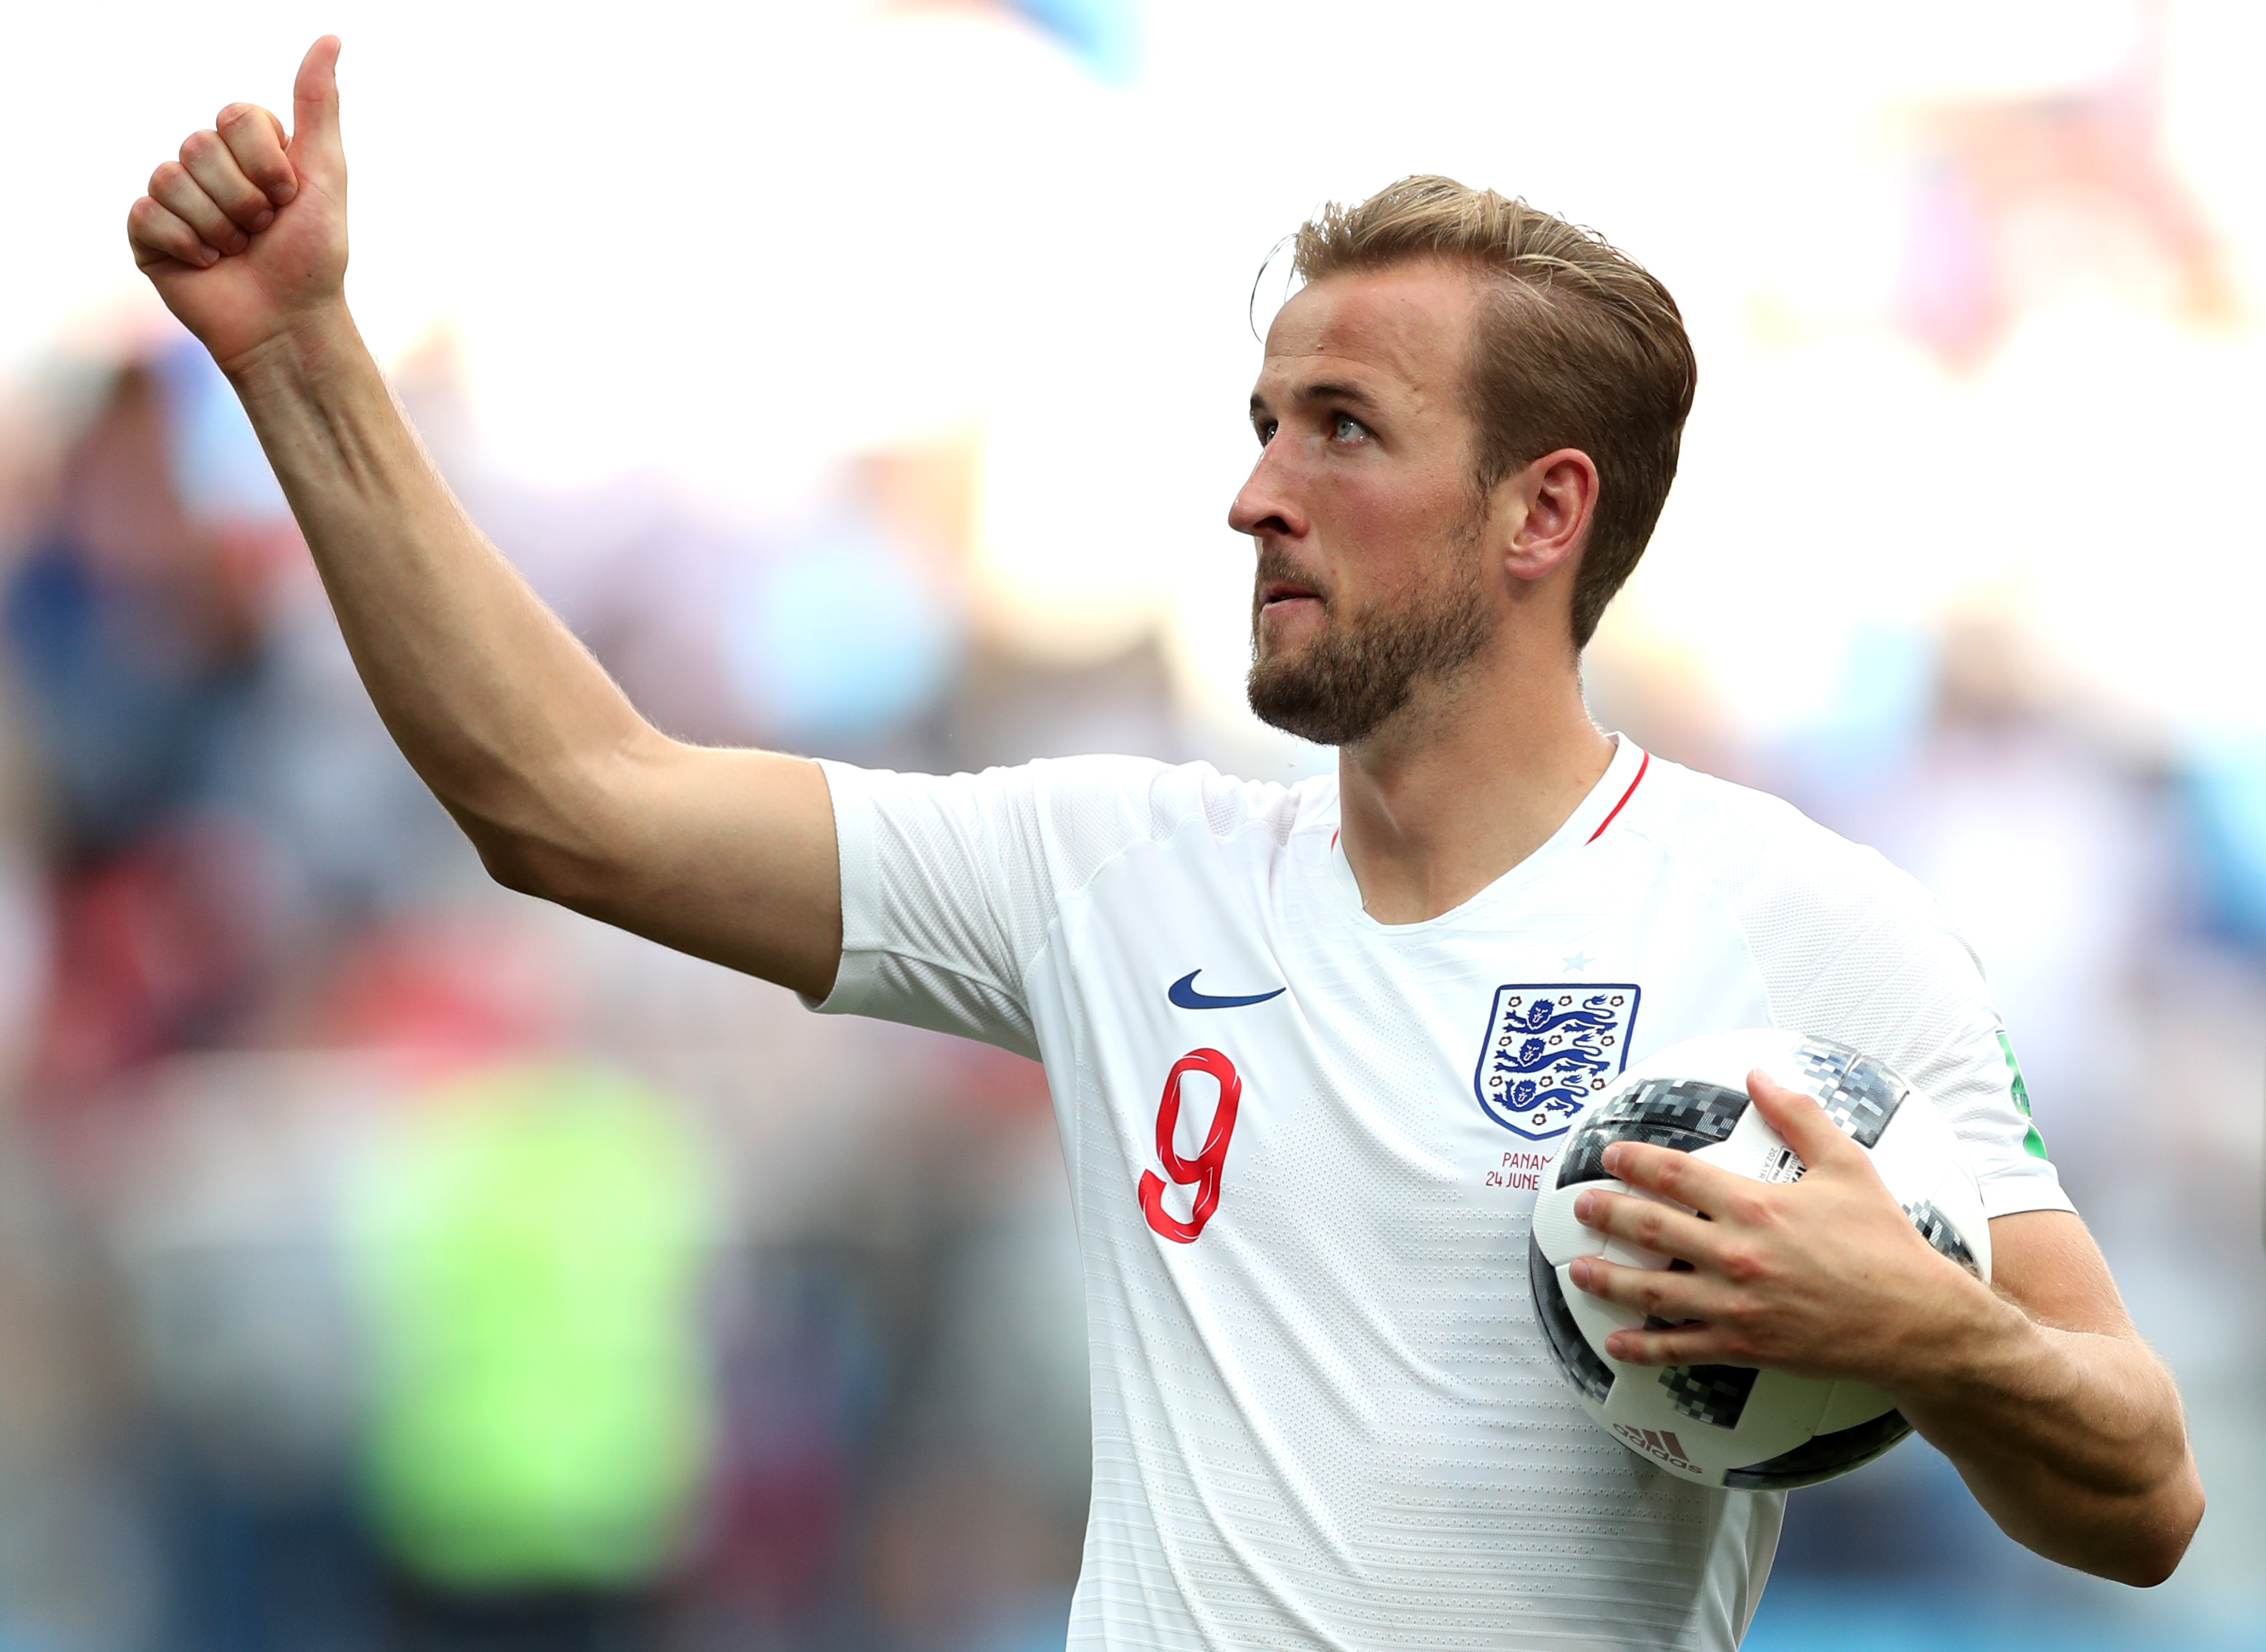 NIZHNY NOVGOROD, RUSSIA - JUNE 24:  Harry Kane of England is seen with the matchball following scoring a hatrick in his sides victory in the 2018 FIFA World Cup Russia group G match between England and Panama at Nizhny Novgorod Stadium on June 24, 2018 in Nizhny Novgorod, Russia.  (Photo by Alex Morton/Getty Images)